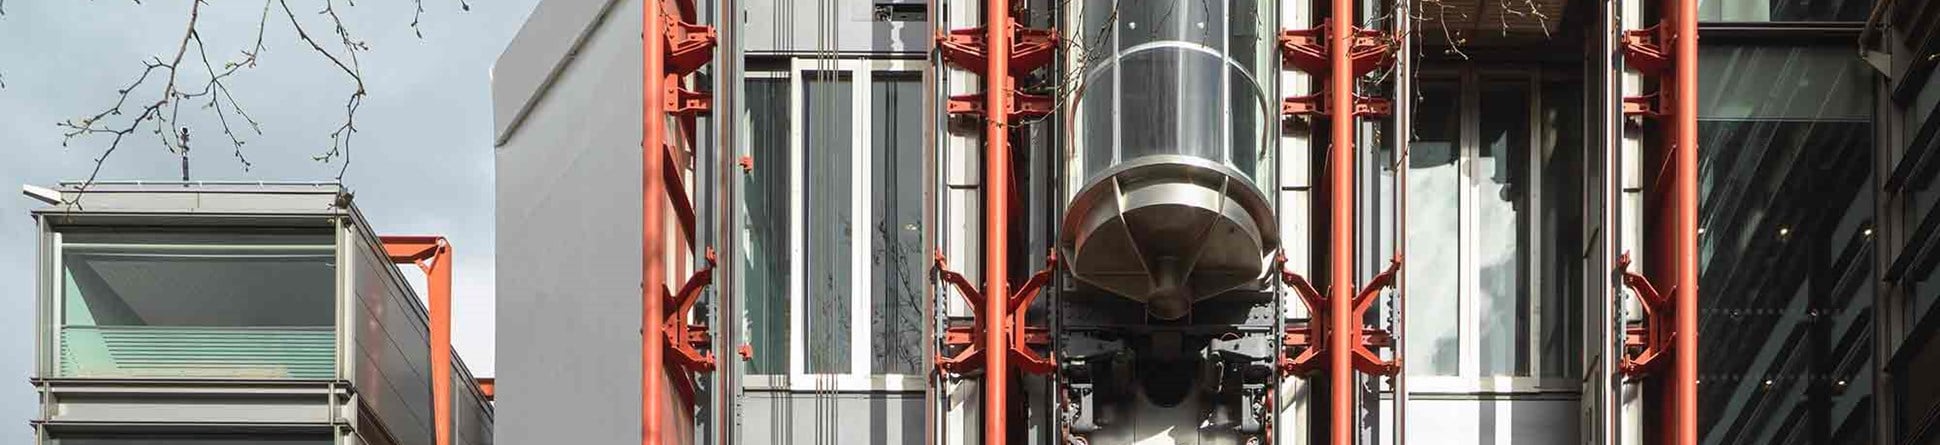 Detail of the exterior lift on the side of a building